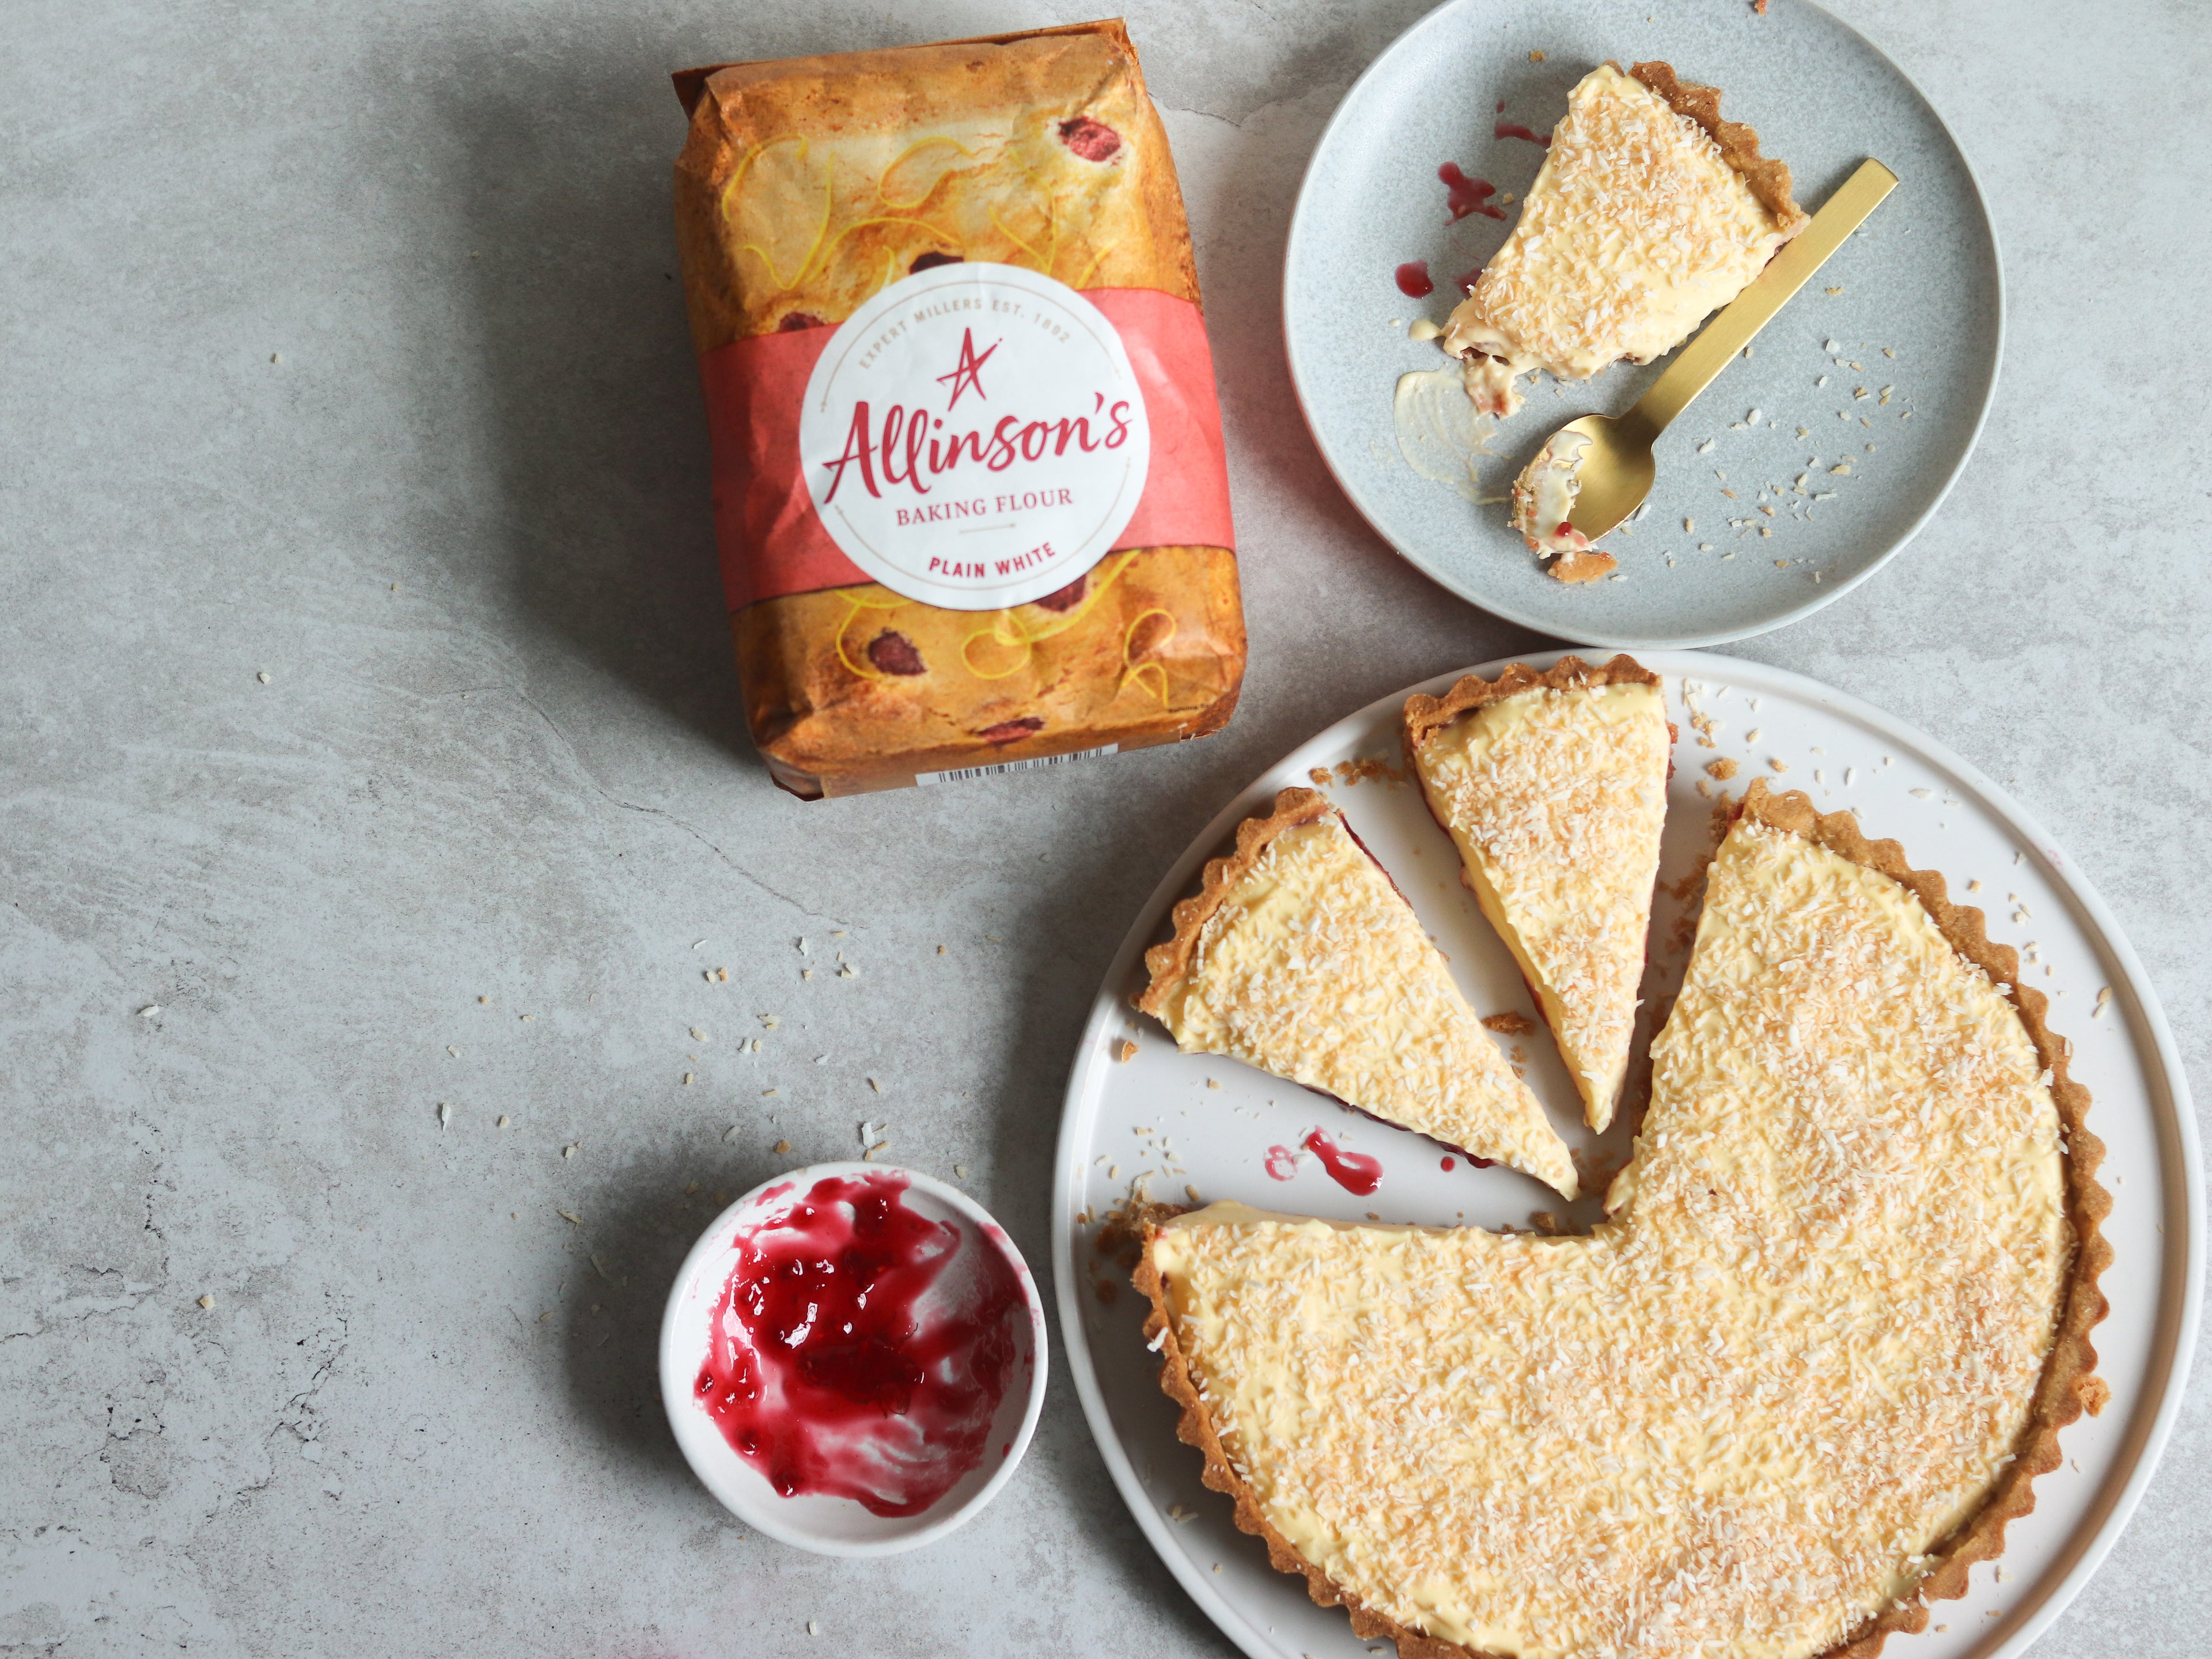 Top view of a Manchester Tart sliced with pieces to serve. Next to a bag of Allinson's Plain Flour and a slice of Manchester Tart on a plate with a spoon covered in toasted coconut